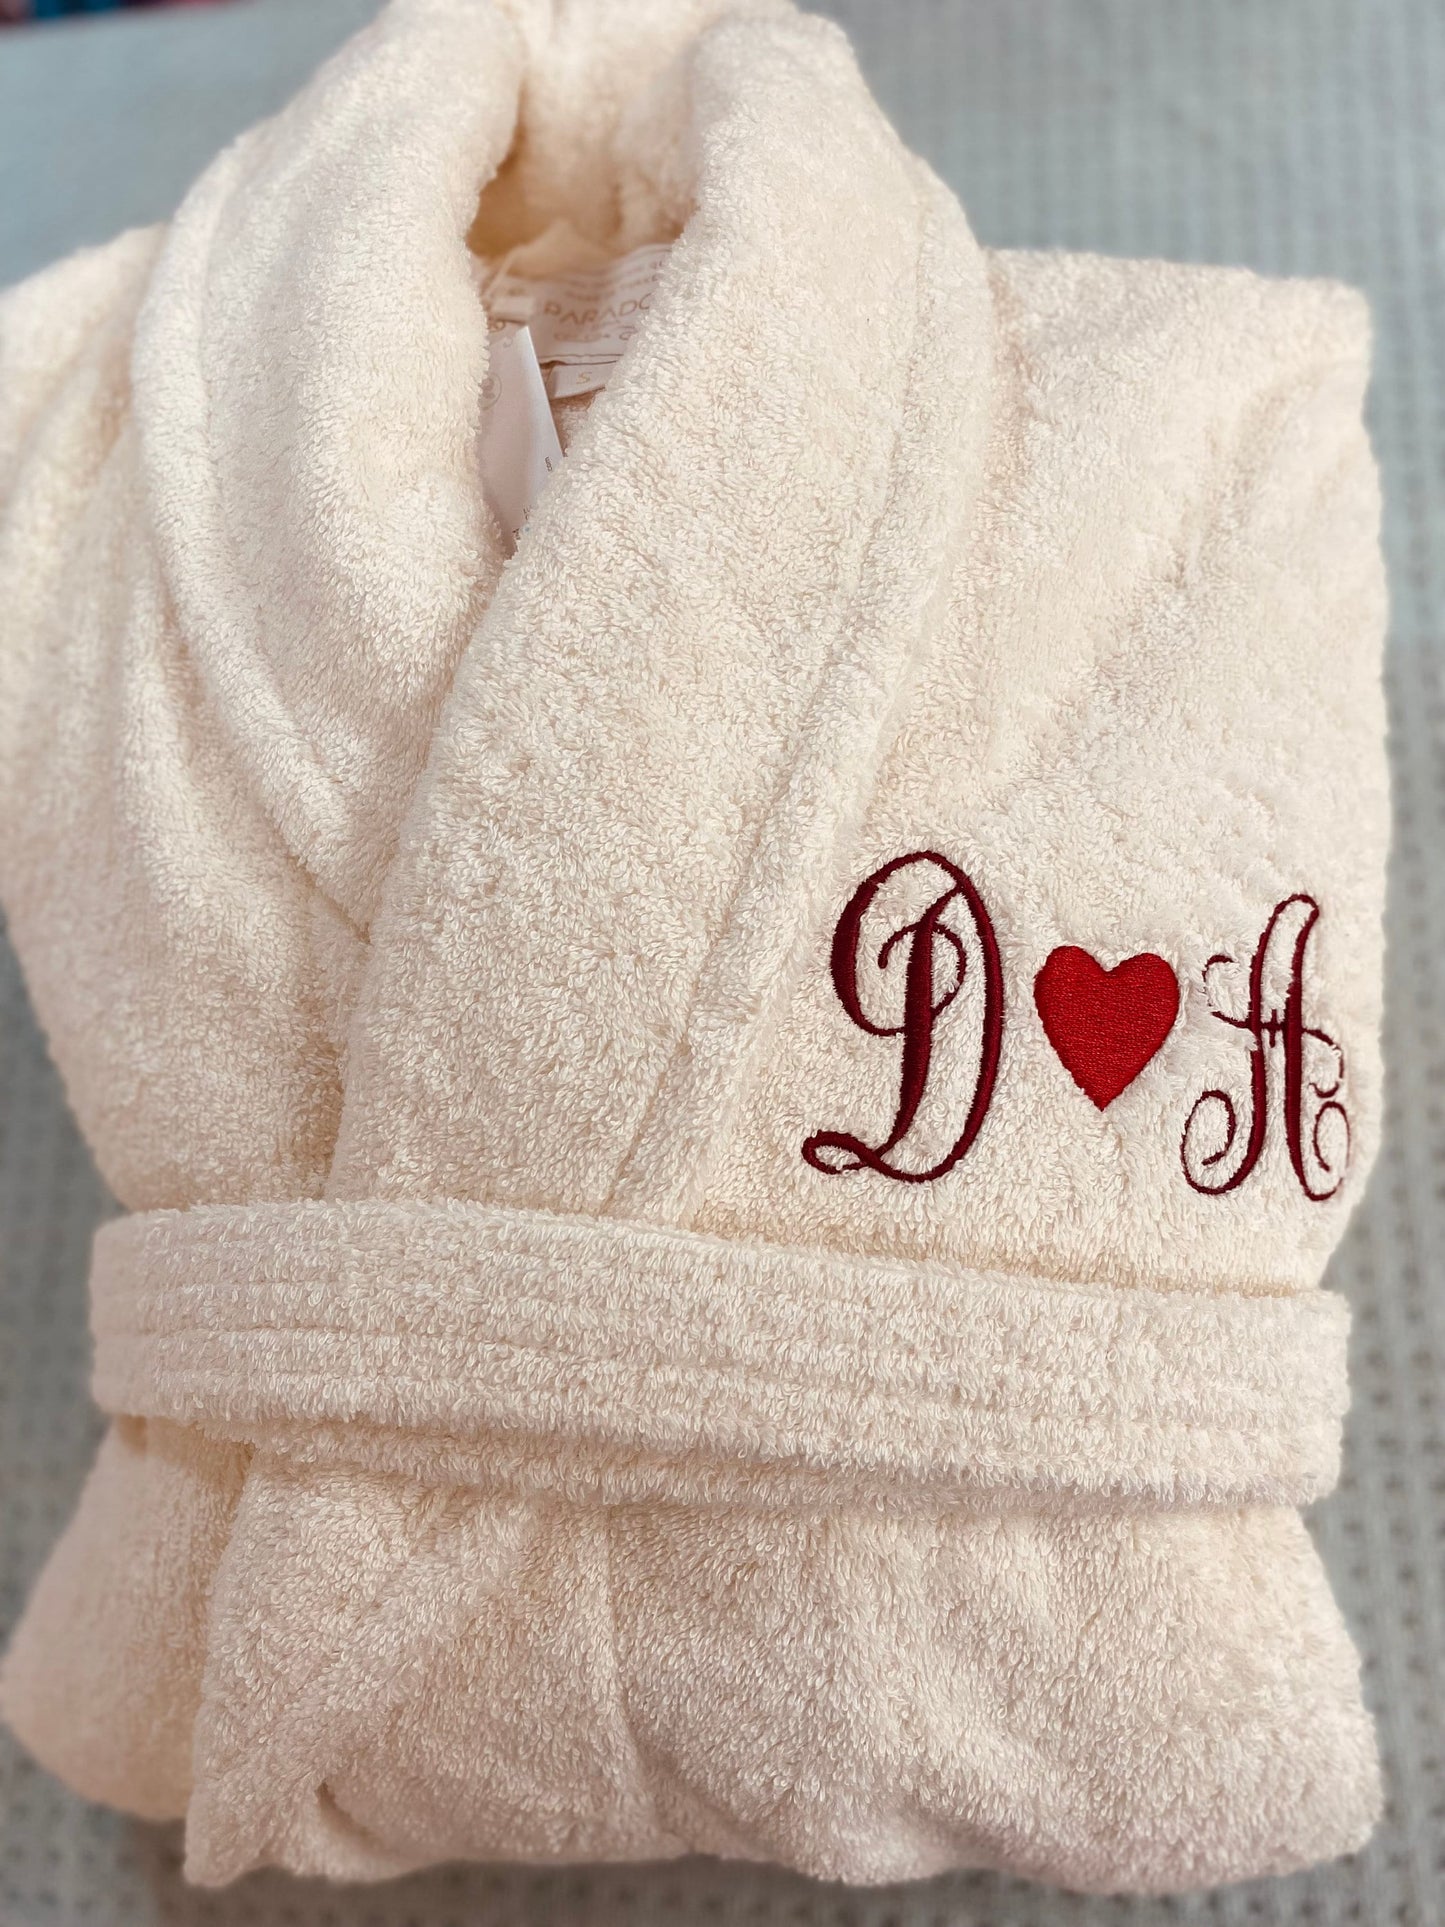 Luxury Turkish Terry Shawl Robe, 100% Cotton, Personalized and Monogrammed Gifts, Wedding, Christmas, Birthday Gift, Unisex